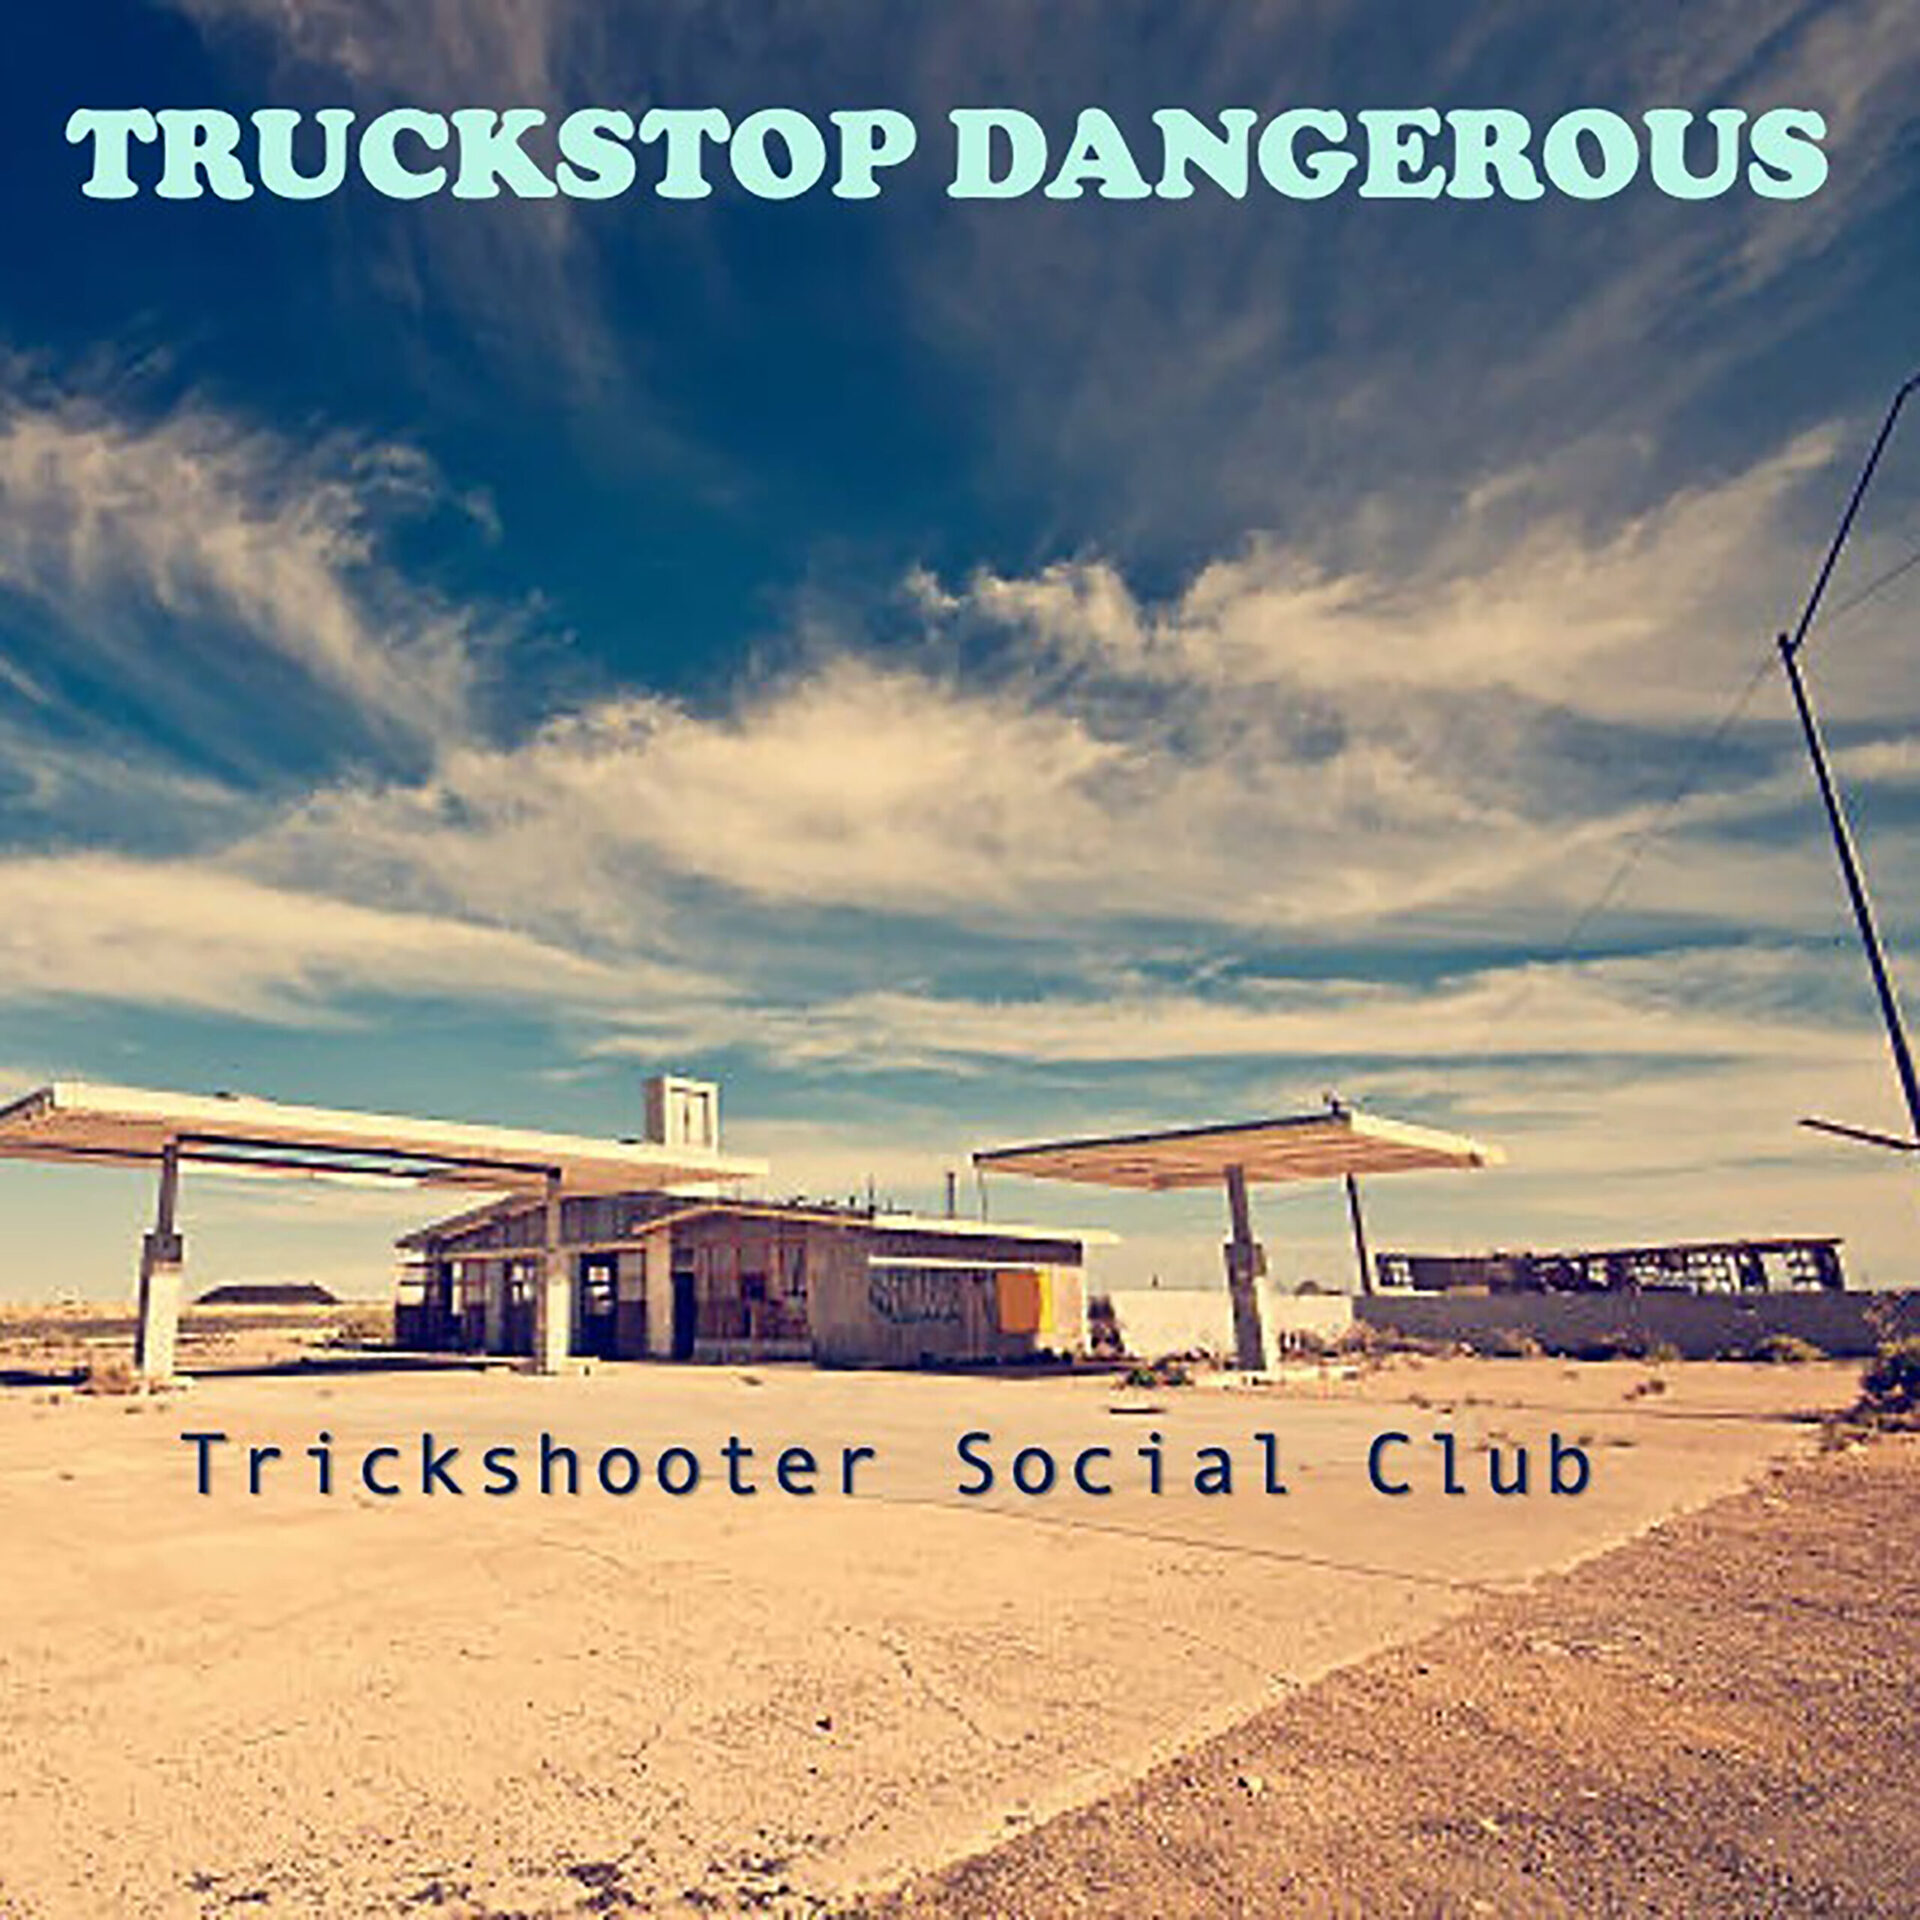 Trick Shooter Social Club with thier EP Truck Stop Dangerous cover art